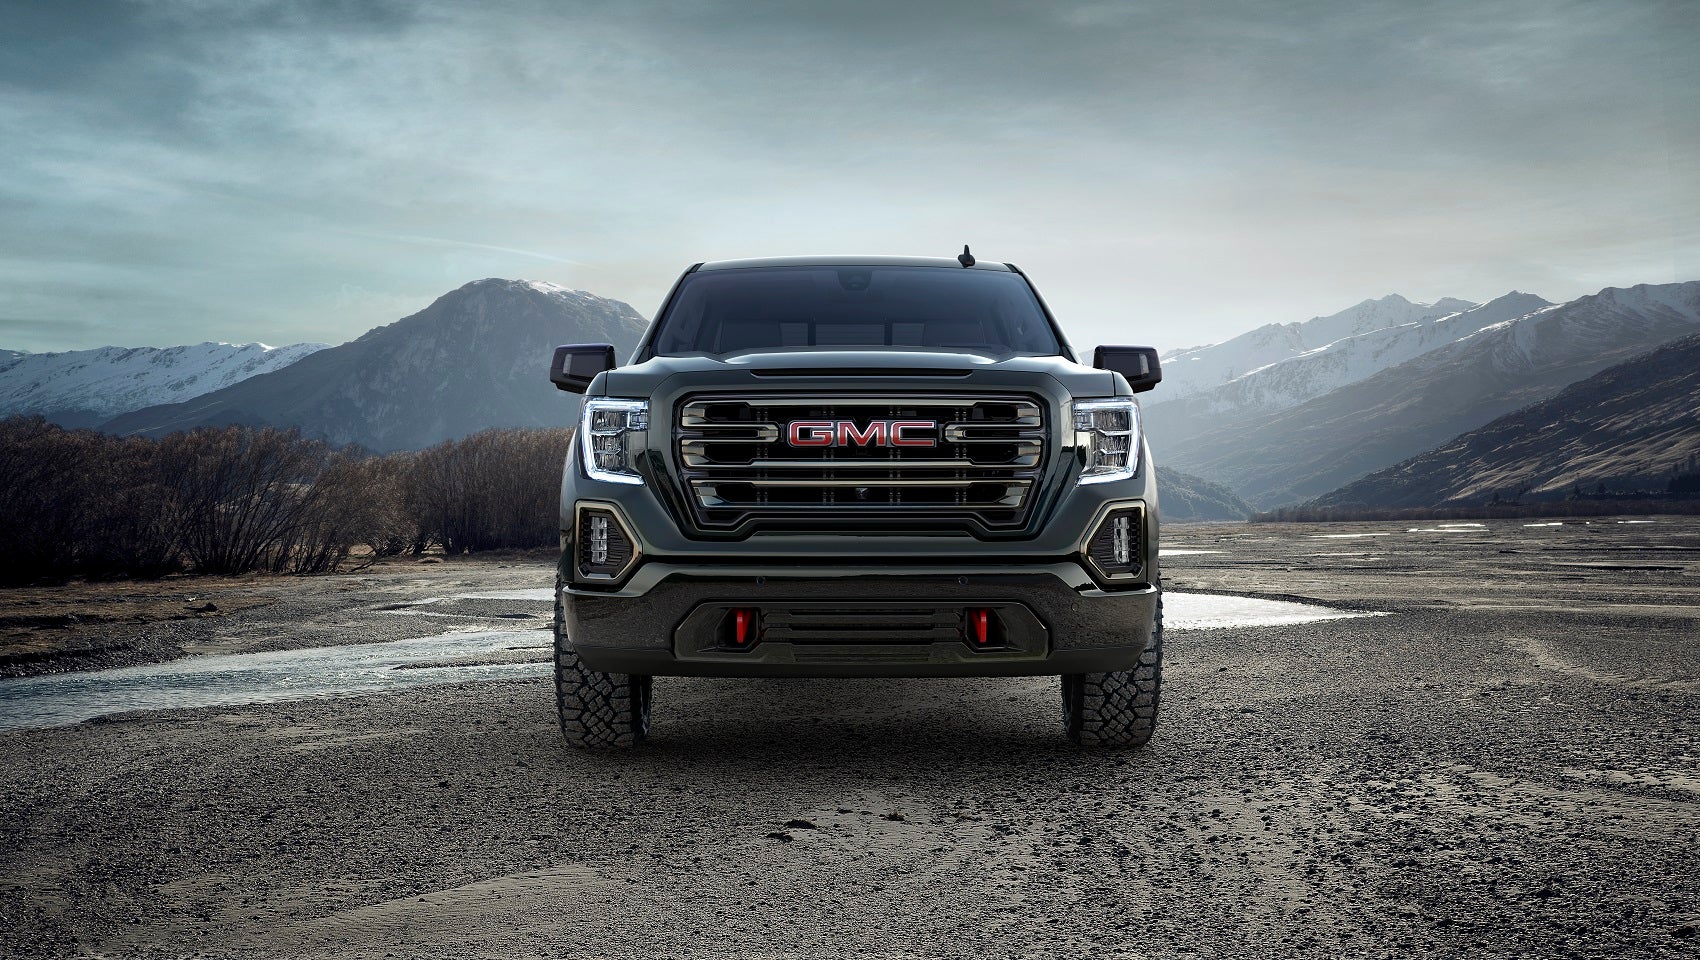 Certified Pre-Owned GMC